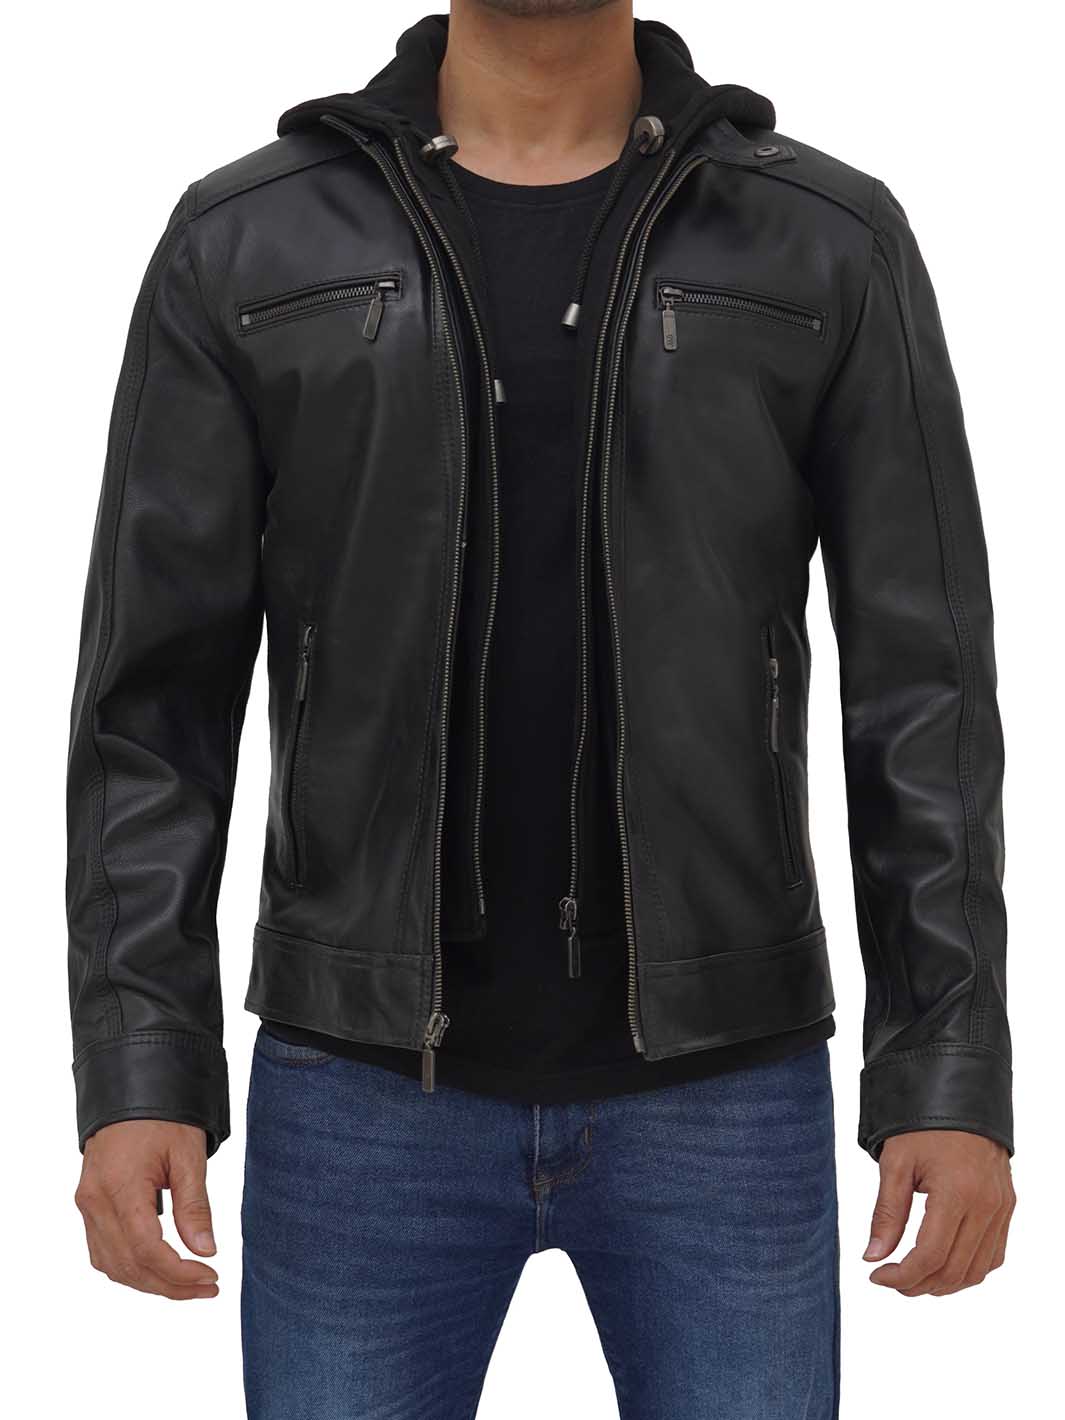 Mens Black Leather Jacket with hood